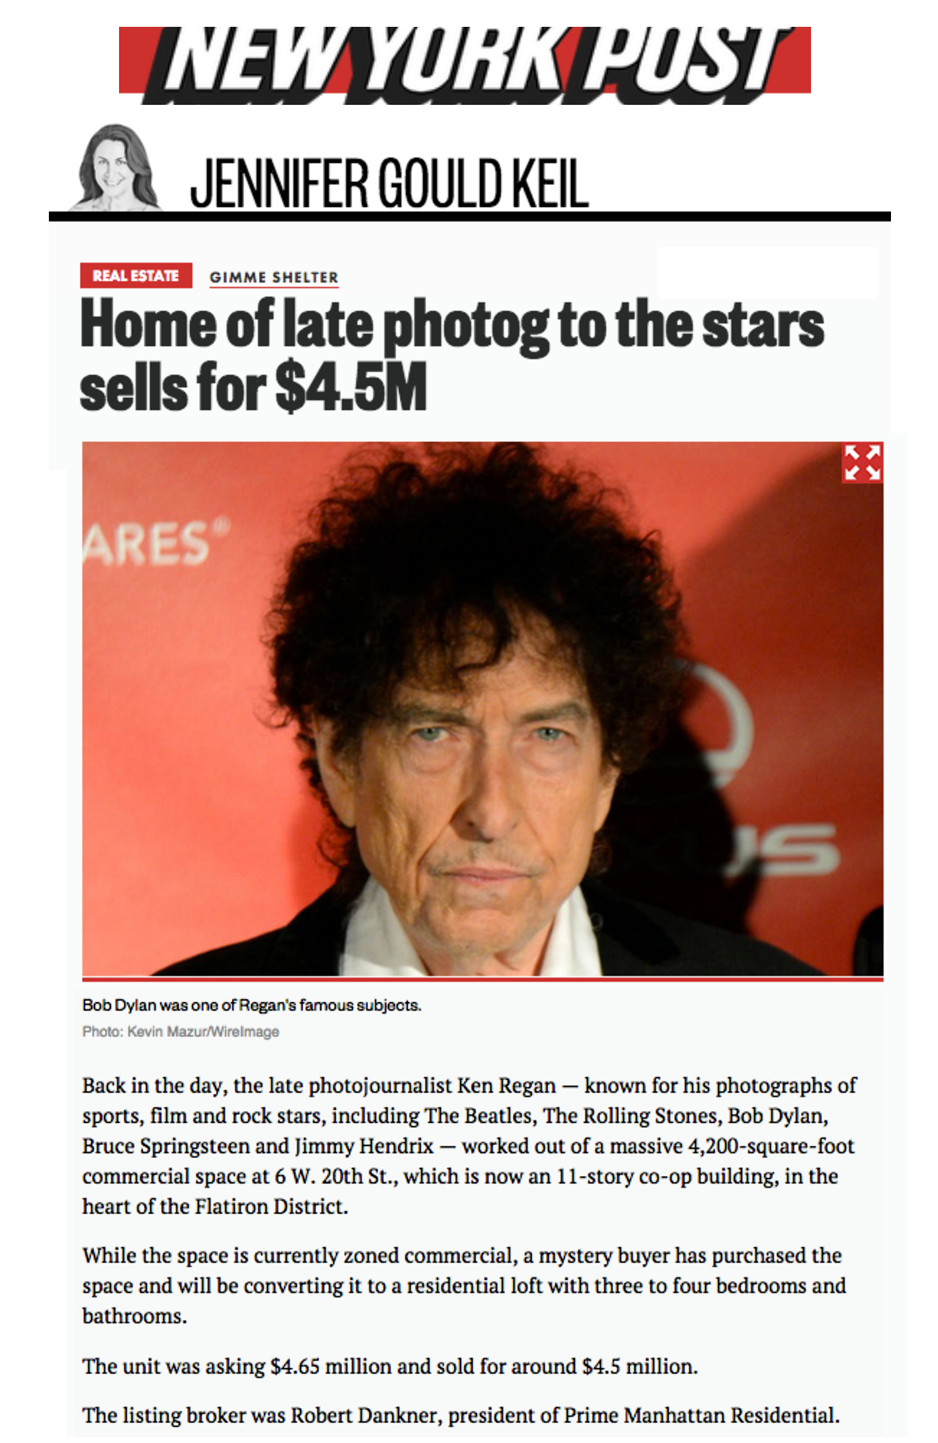 Home Of Late Photographer To The Stars Sells For 4.5 Million Dollars part 1